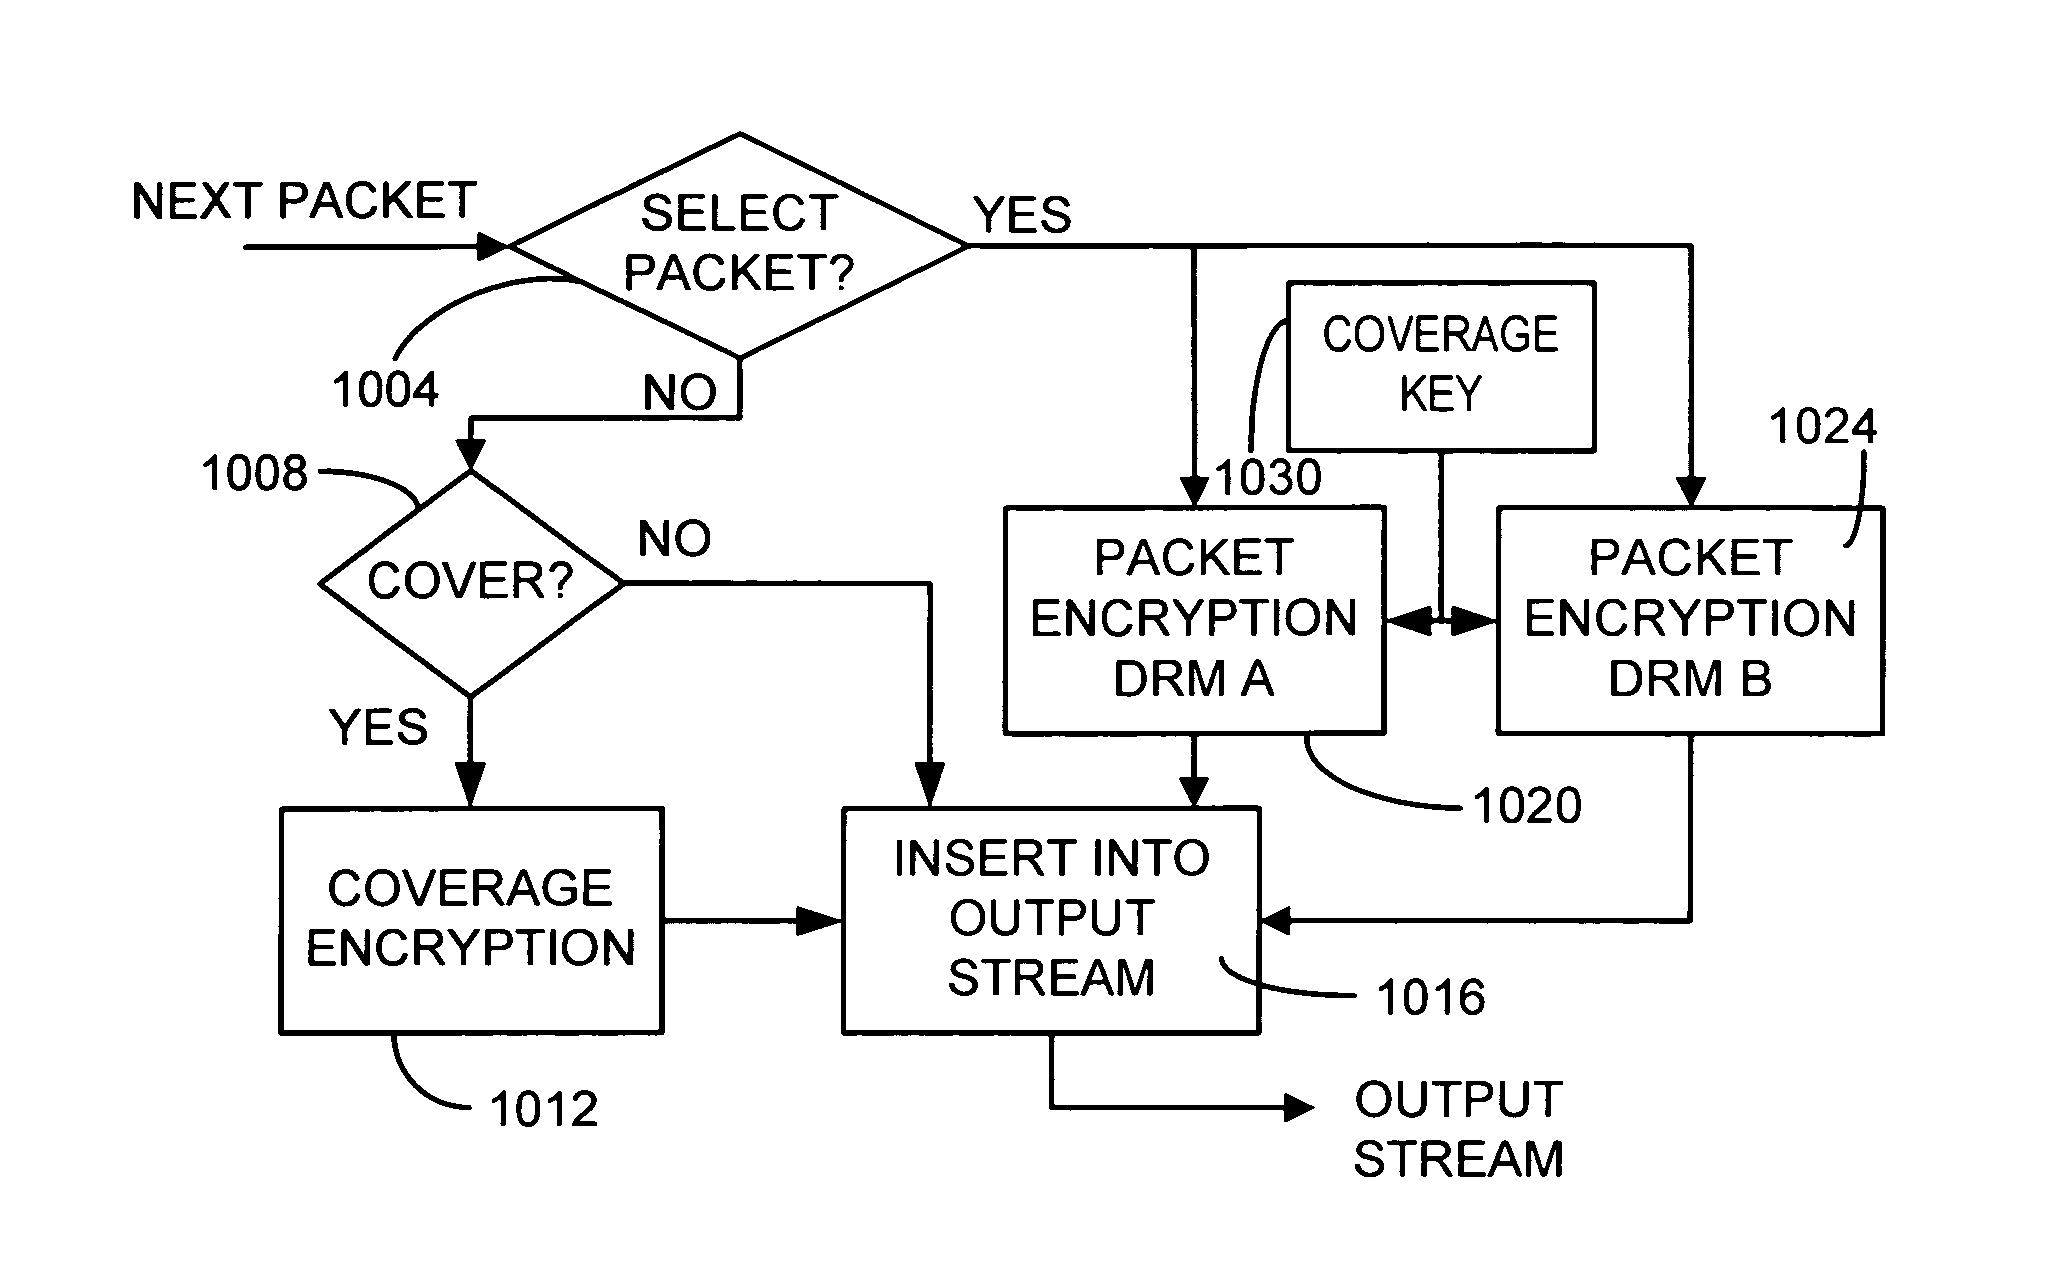 Selective encryption with coverage encryption